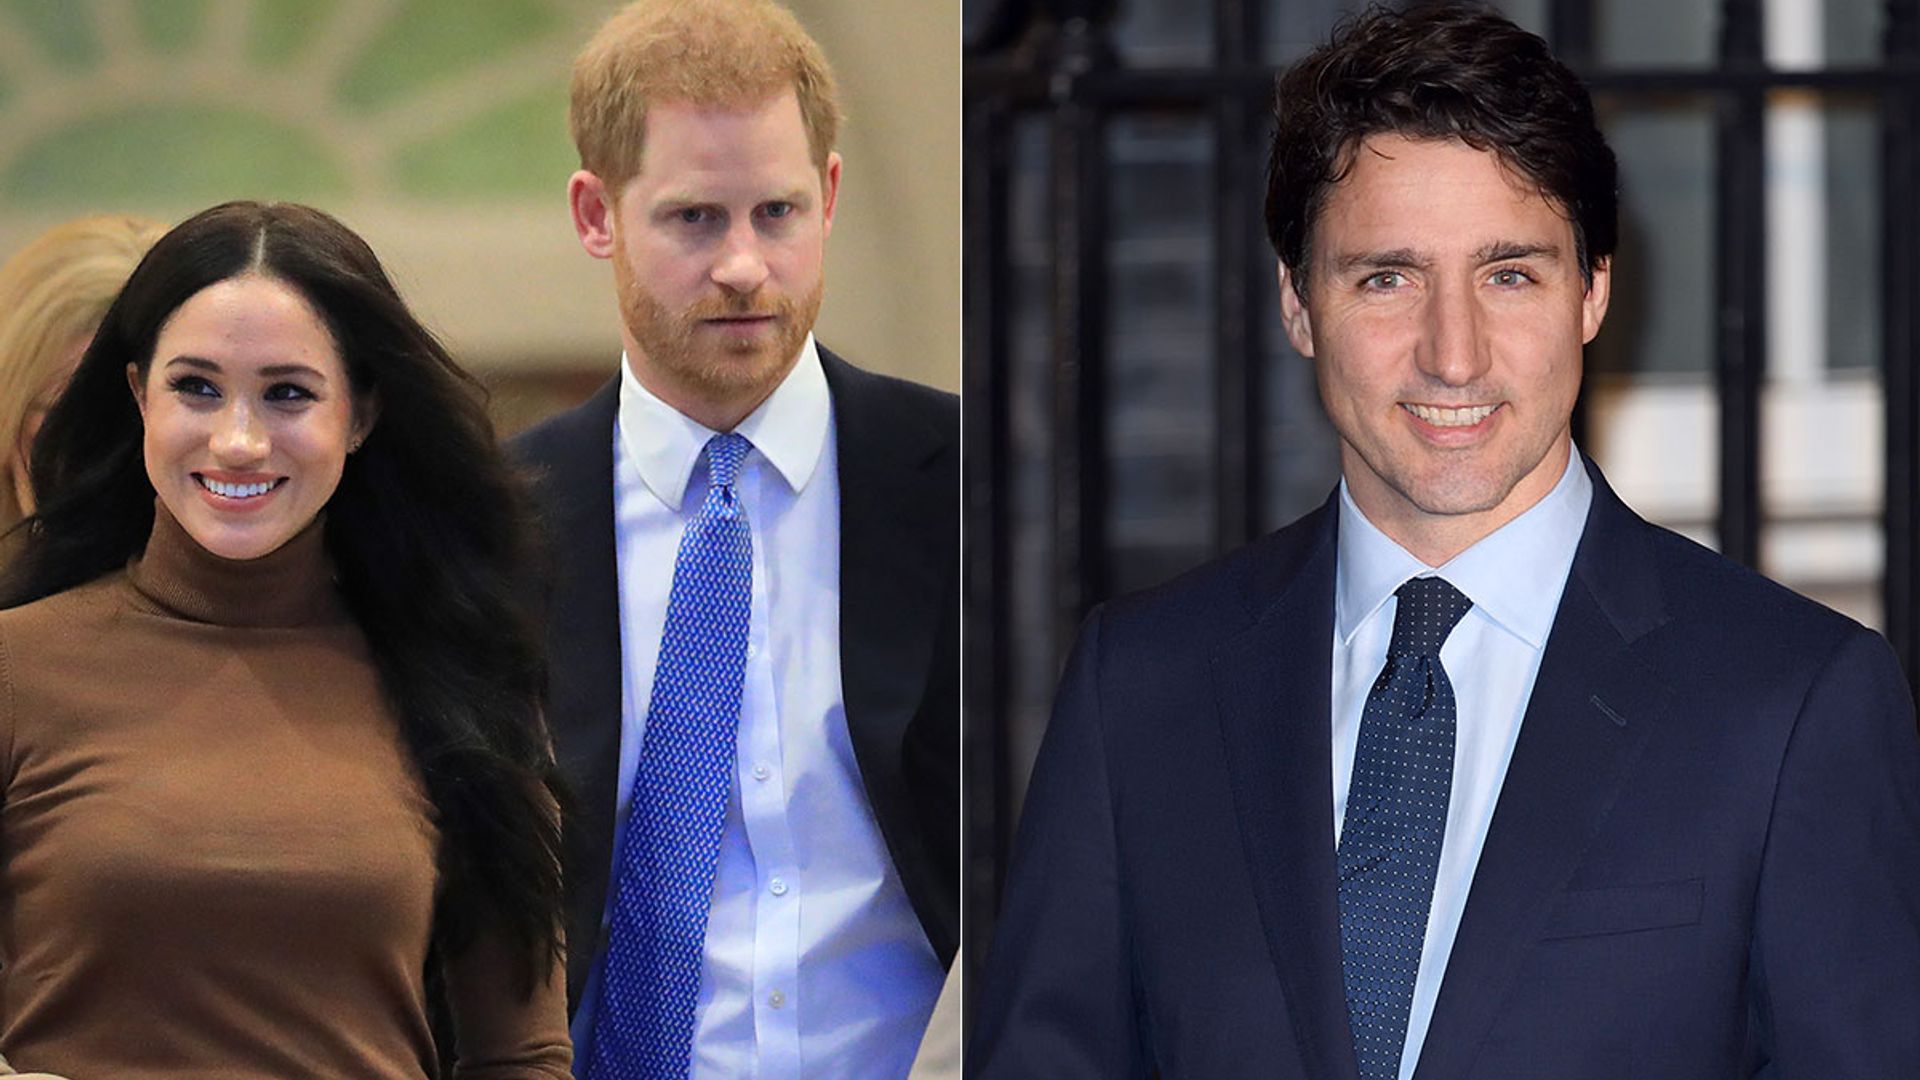 Justin Trudeau addresses Prince Harry and Meghan Markle's move to Canada